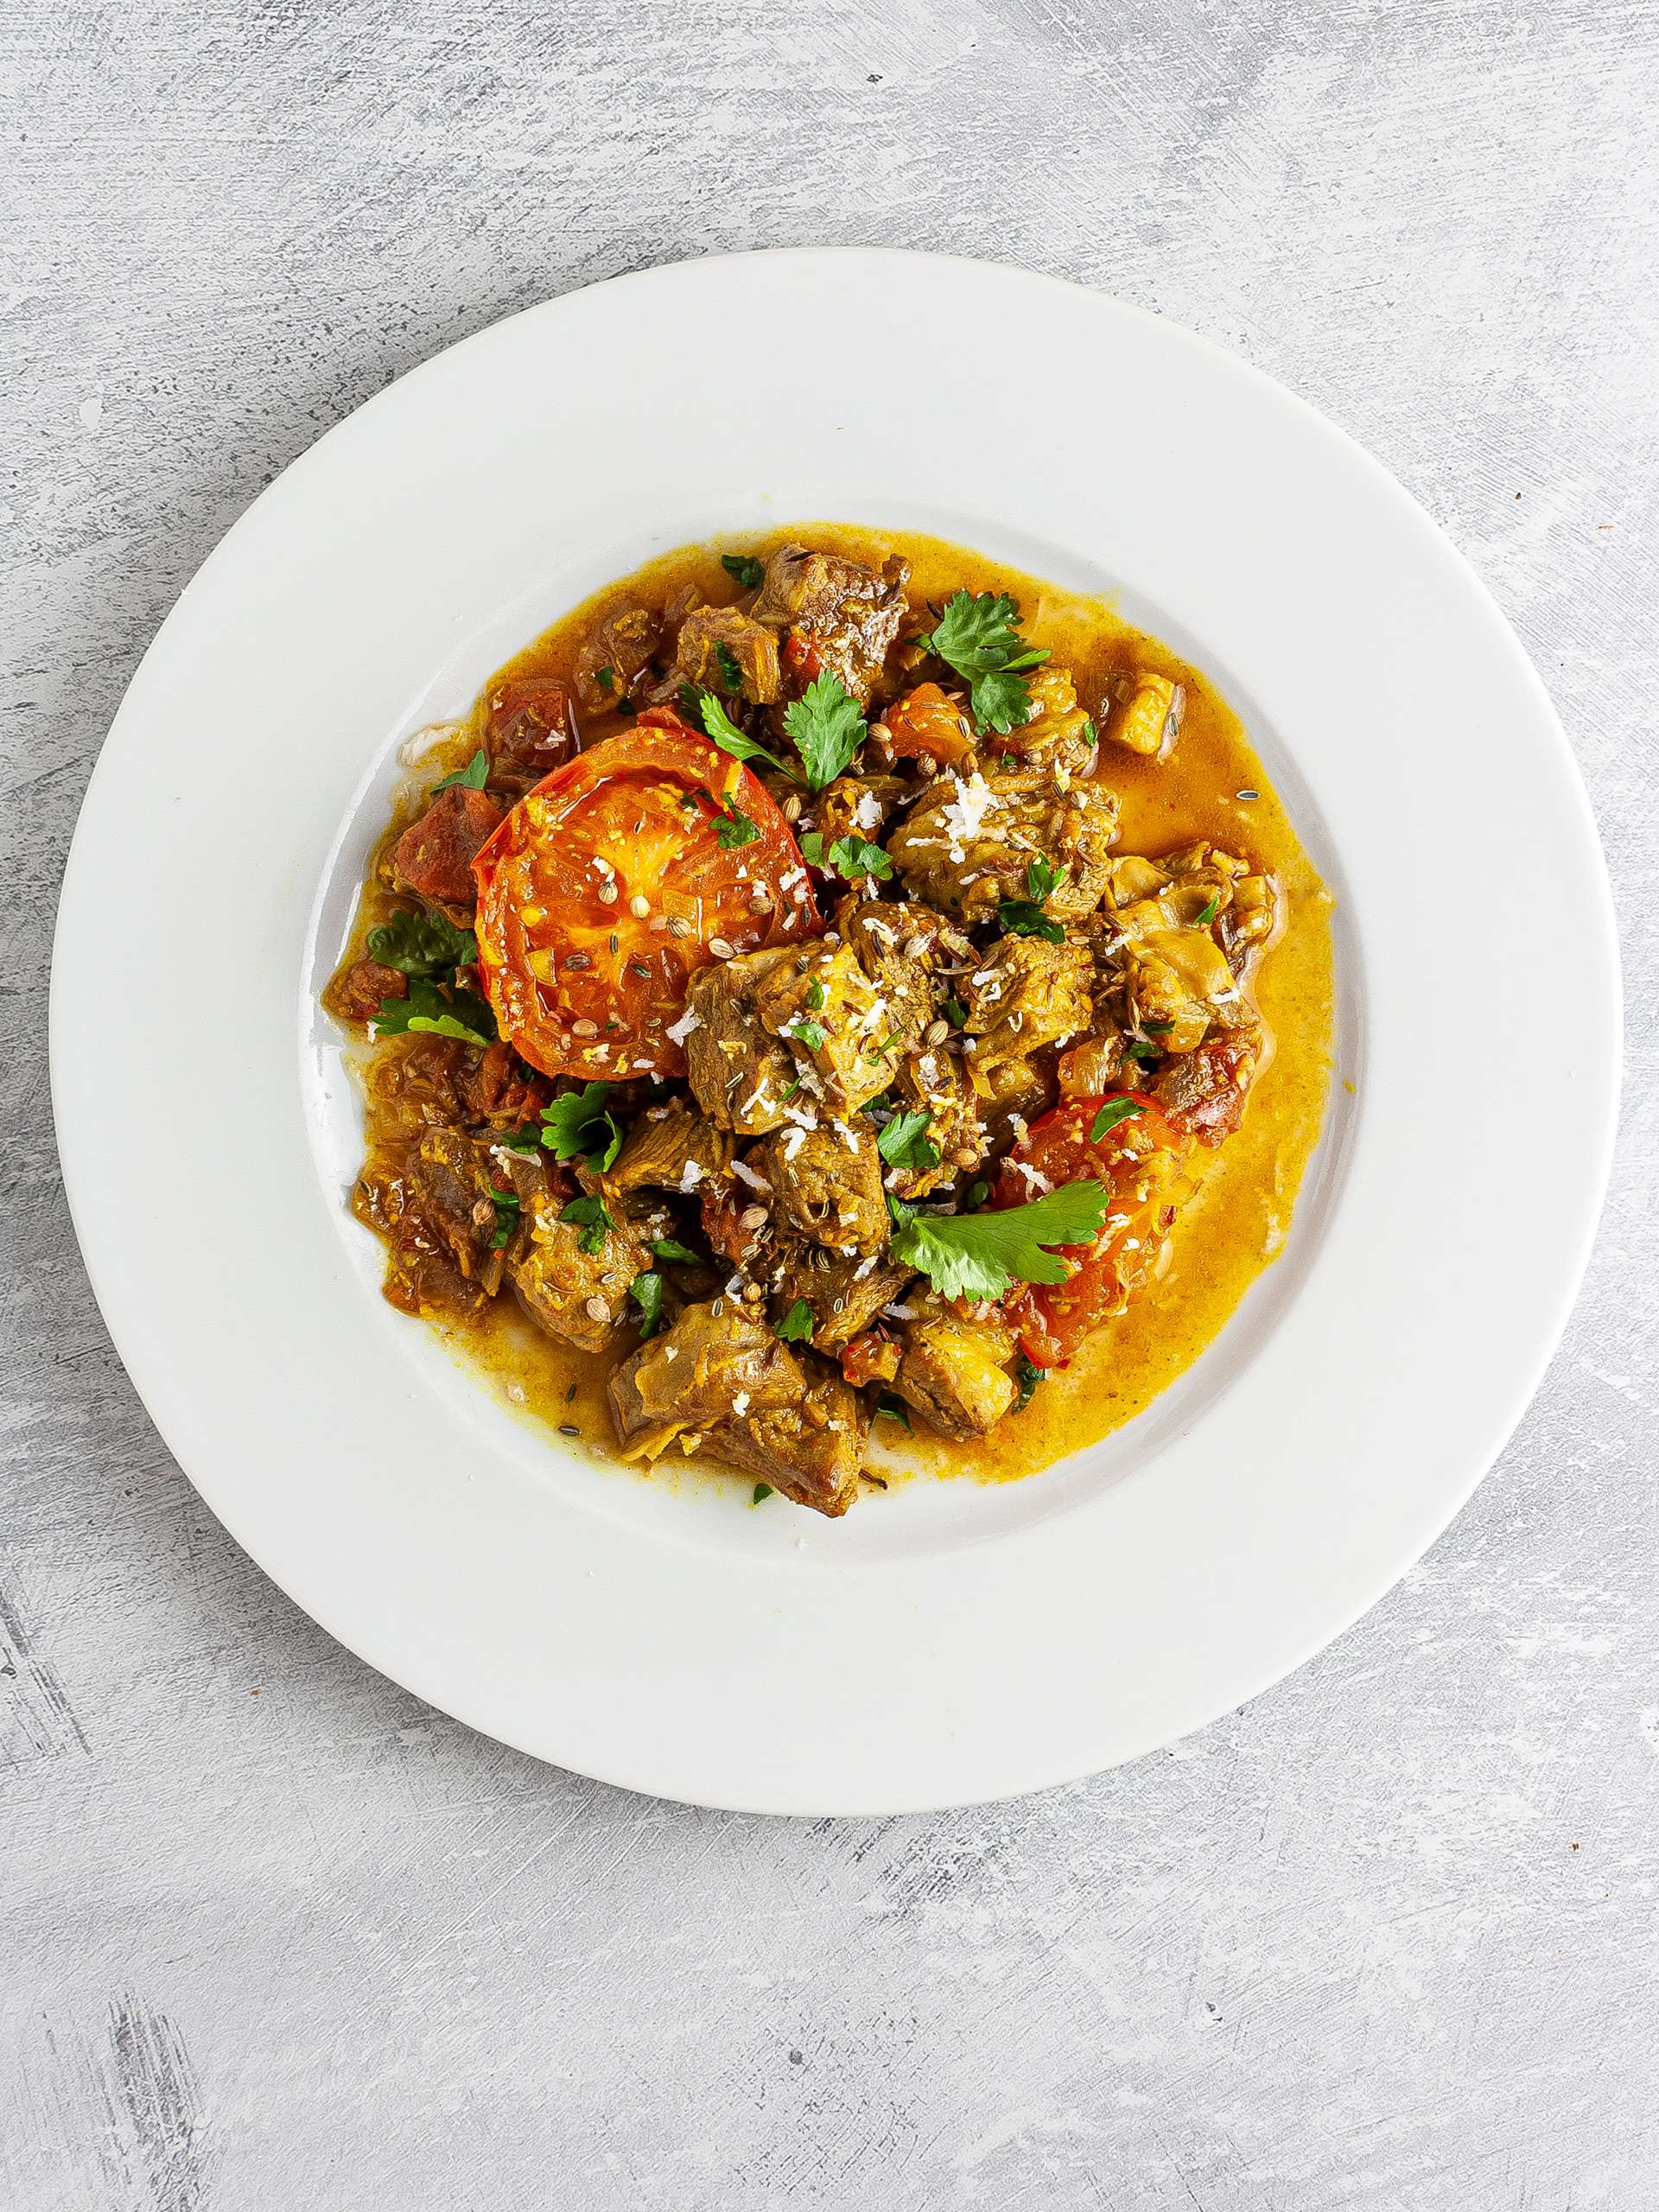 Lamb chettinad served with coconut and coriander